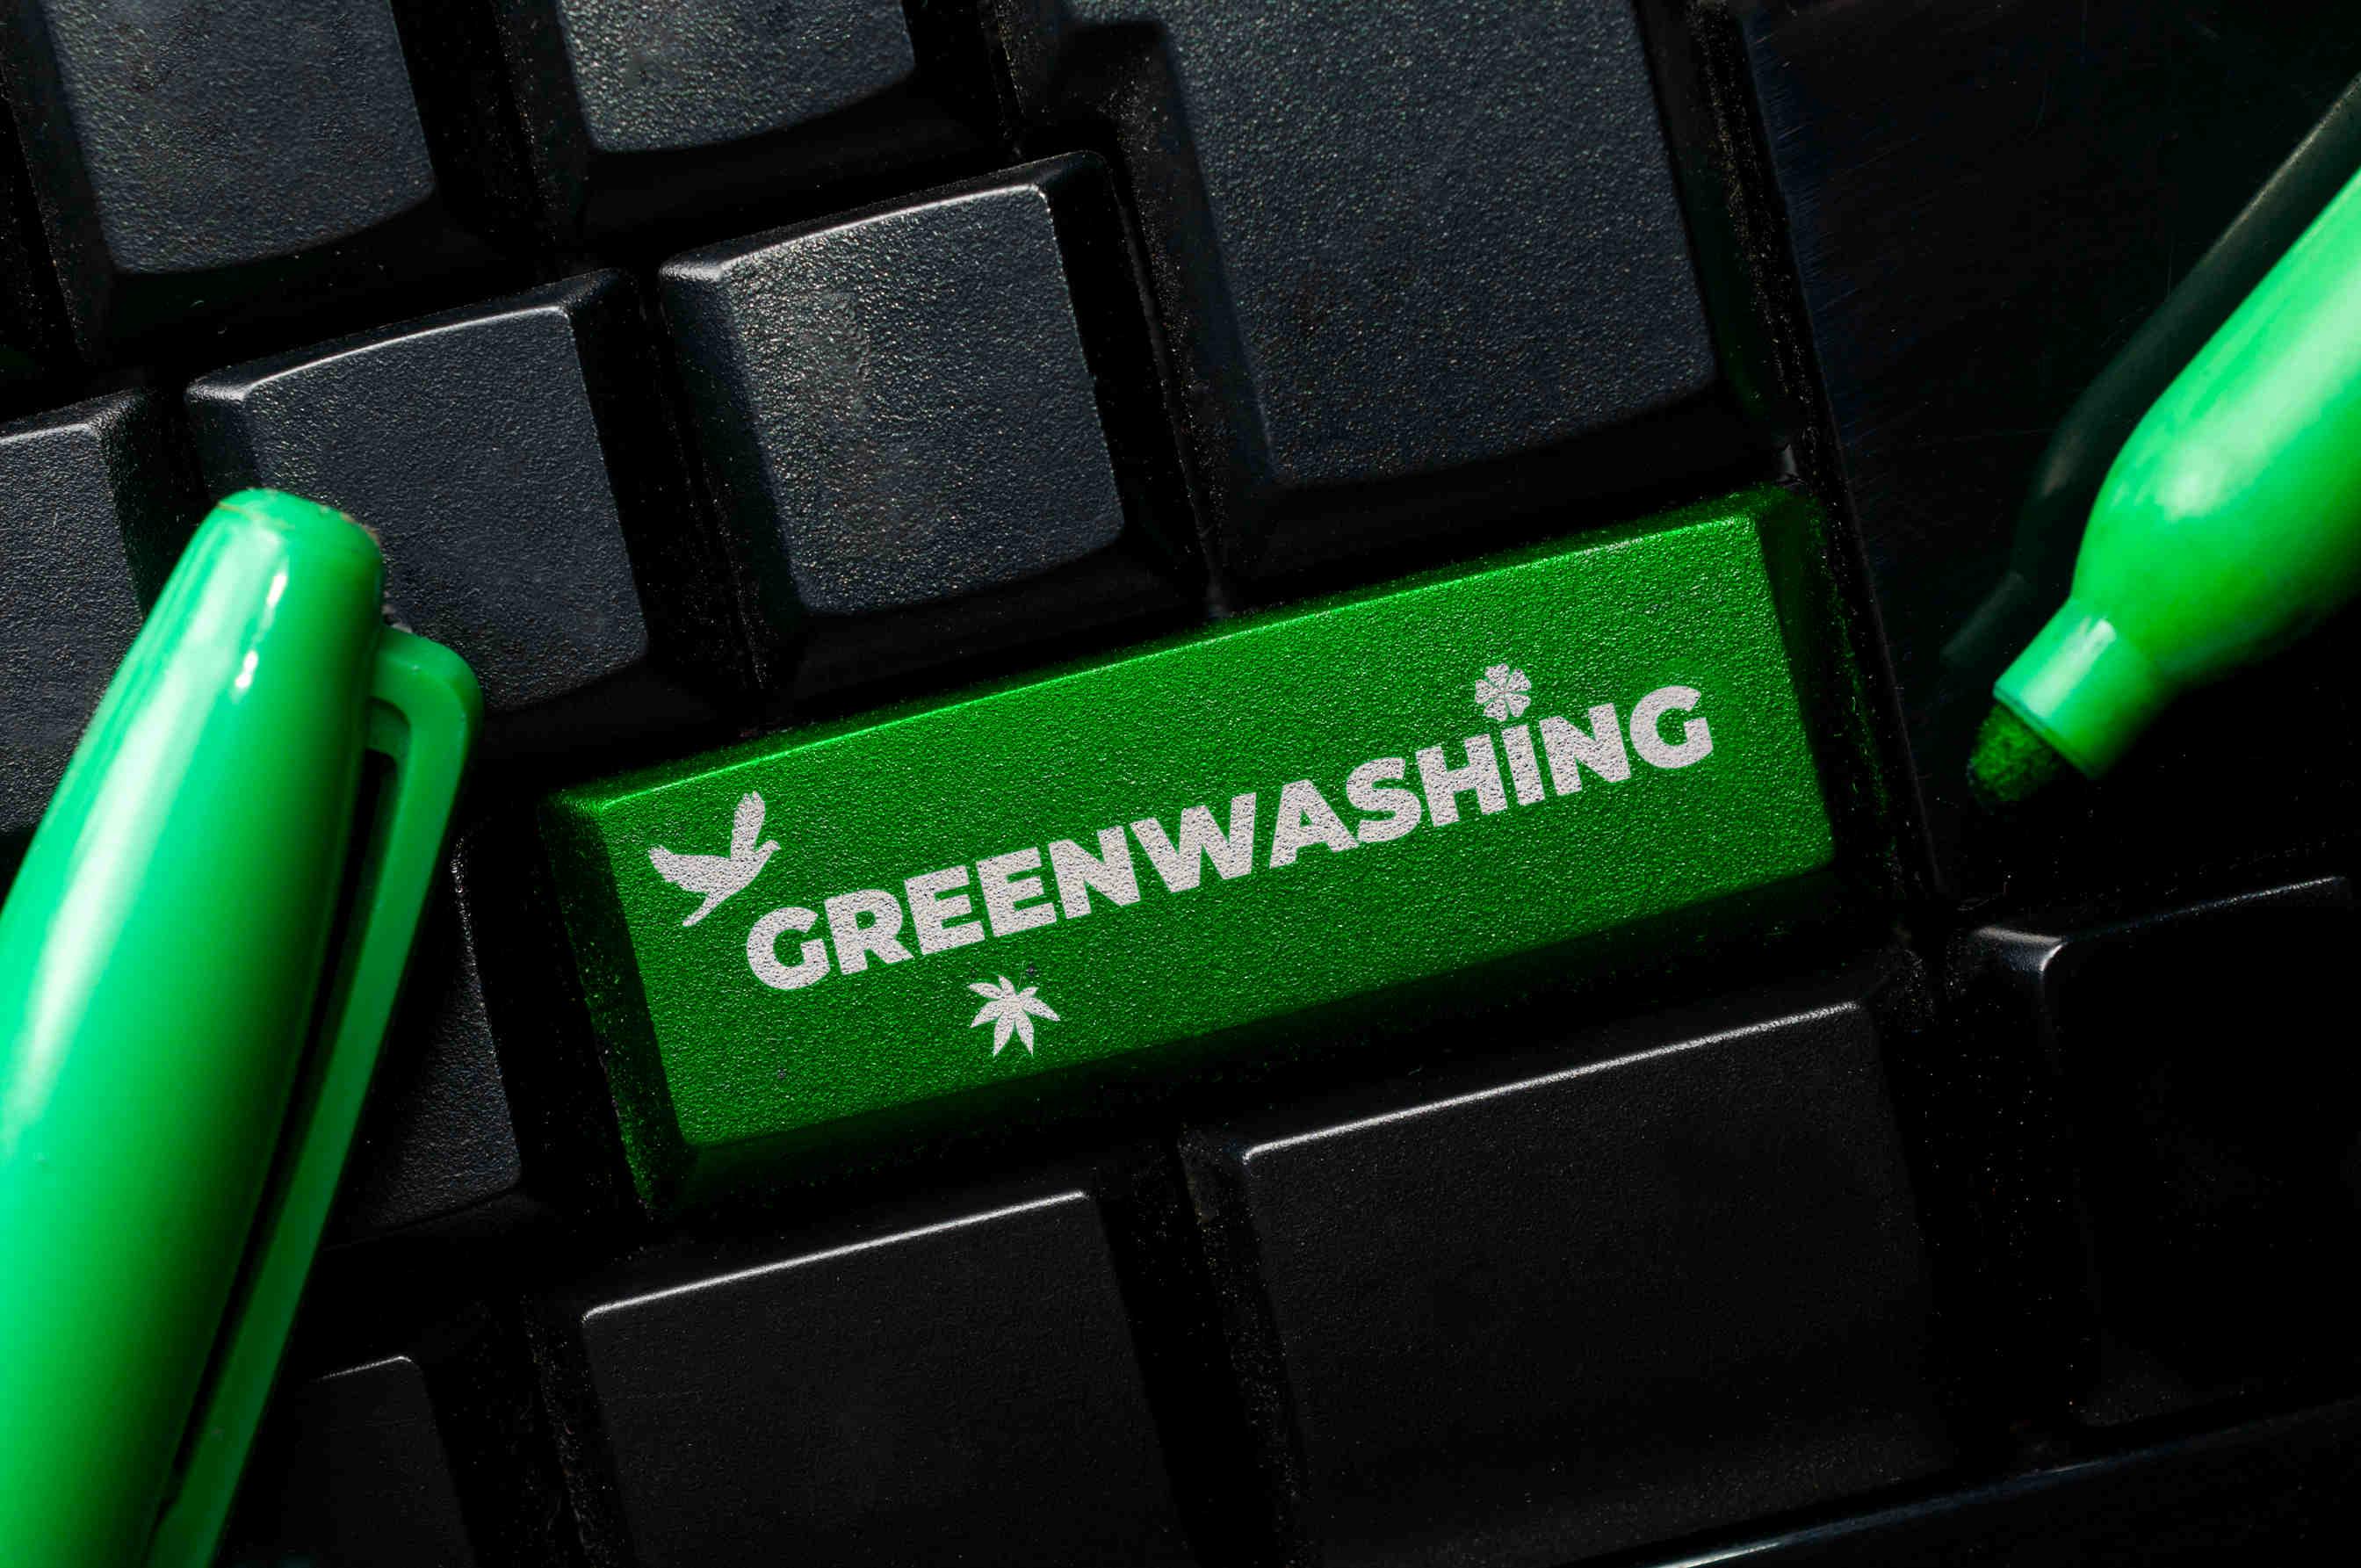 Less tolerance for greenwashing